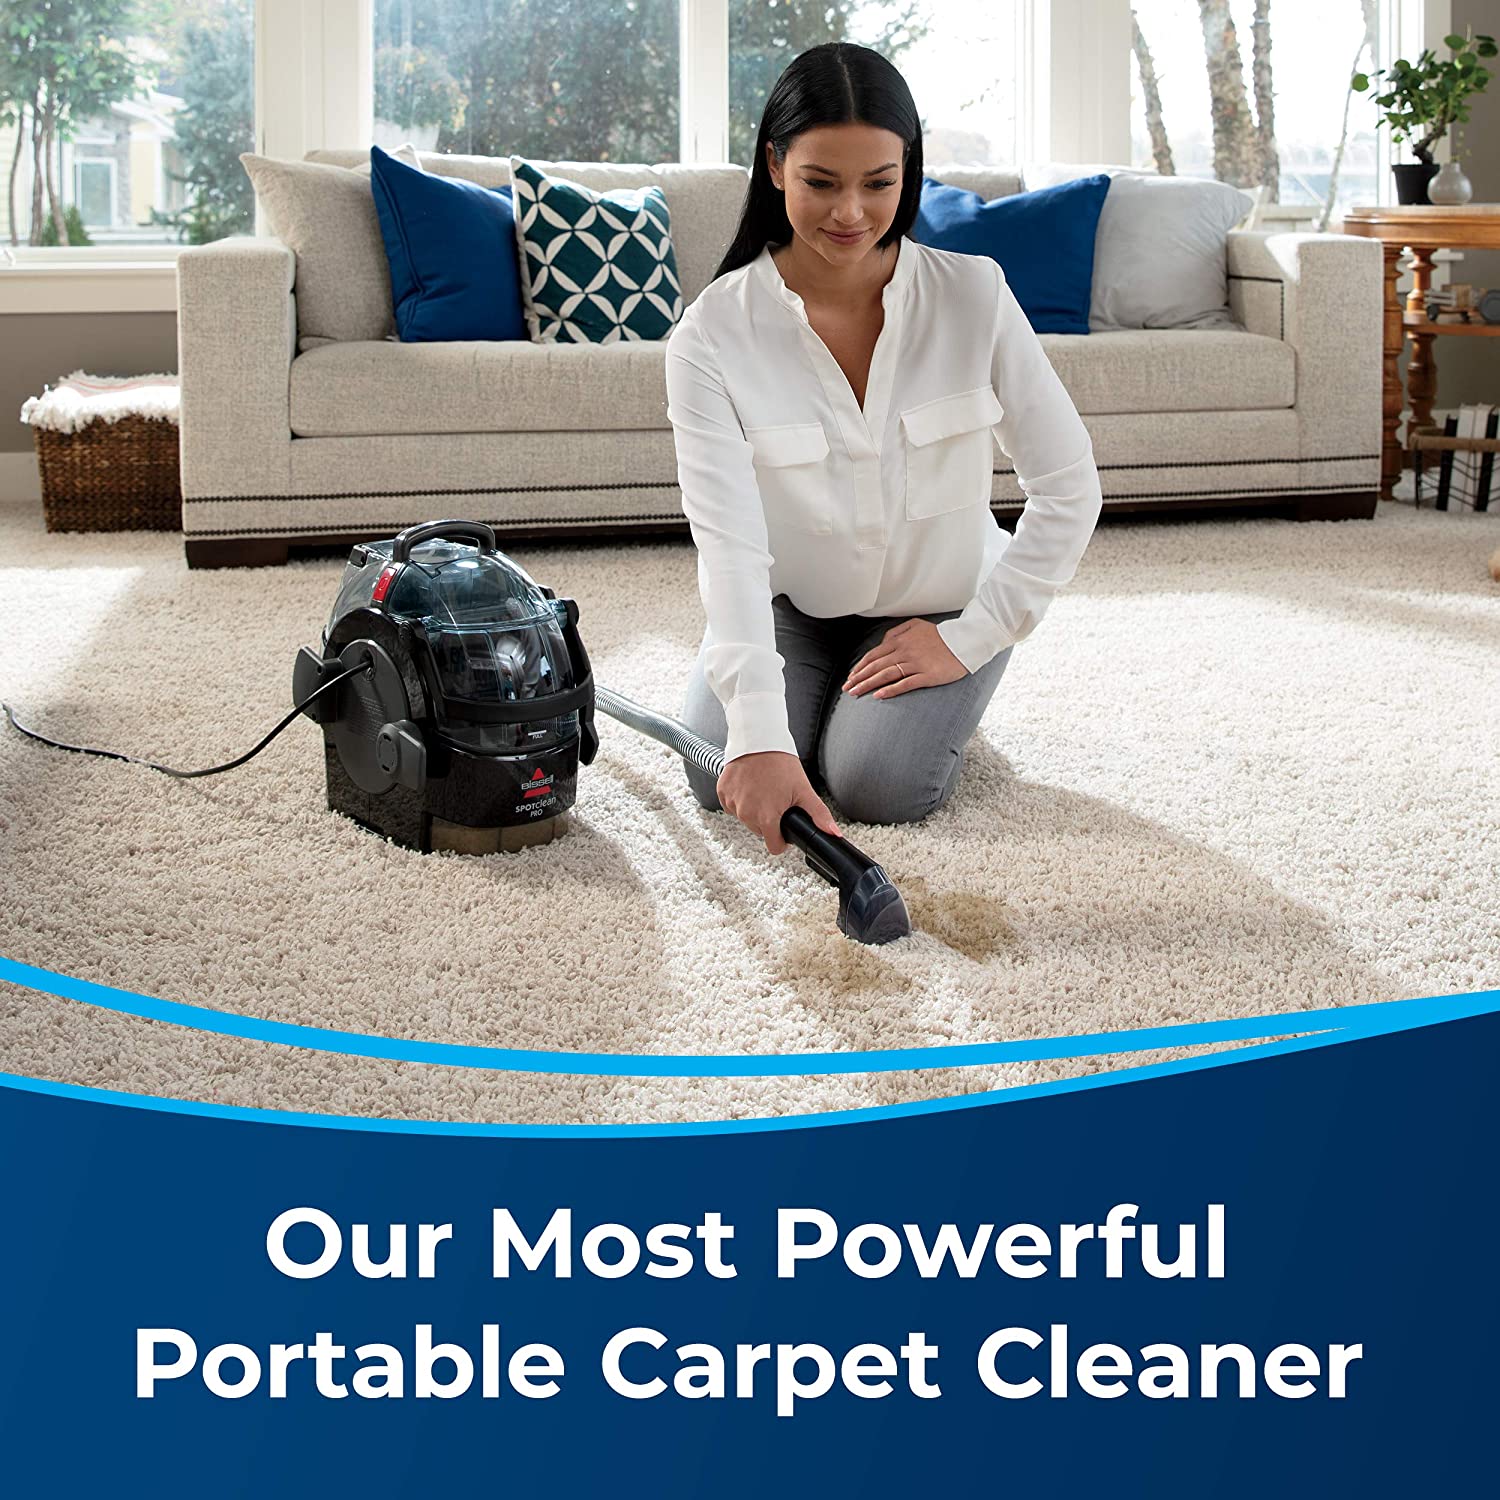 BISSELL 3624 Lightweight SpotClean Professional Portable Carpet Cleaner, Black - image 3 of 9